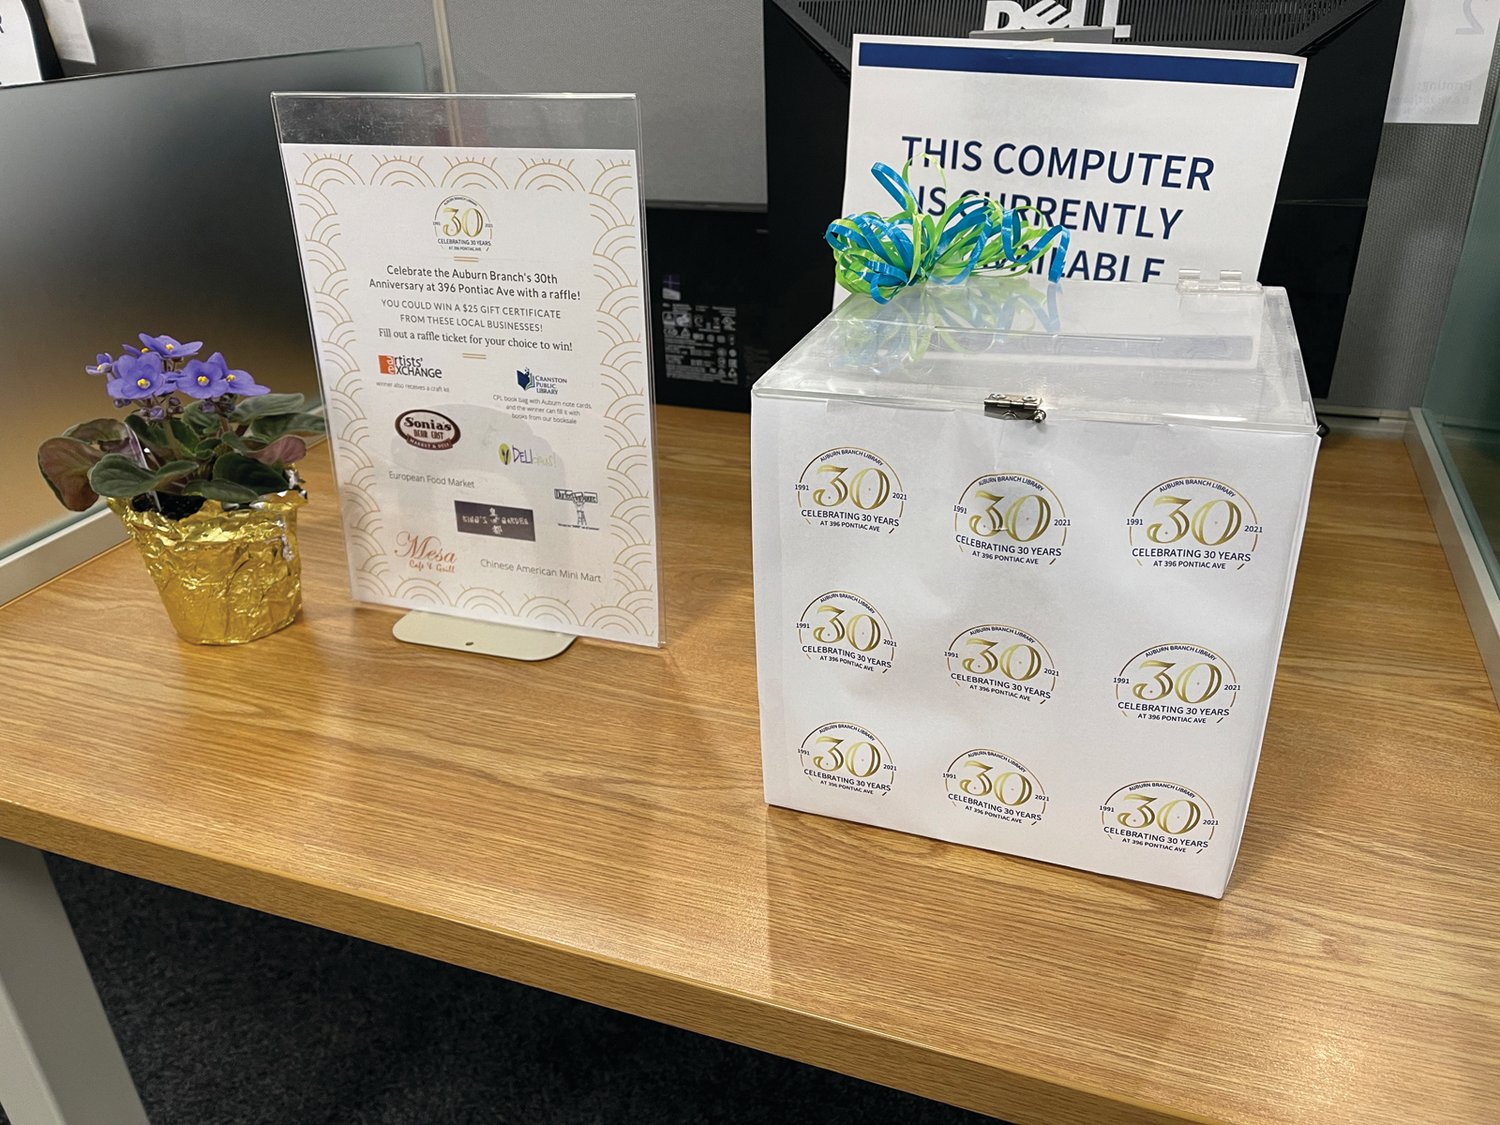 COMMUNITY SUPPORT: A number of Rolfe Square area businesses donated gift cards for a raffle held as part of the Auburn Branch’s 30th anniversary celebration. 